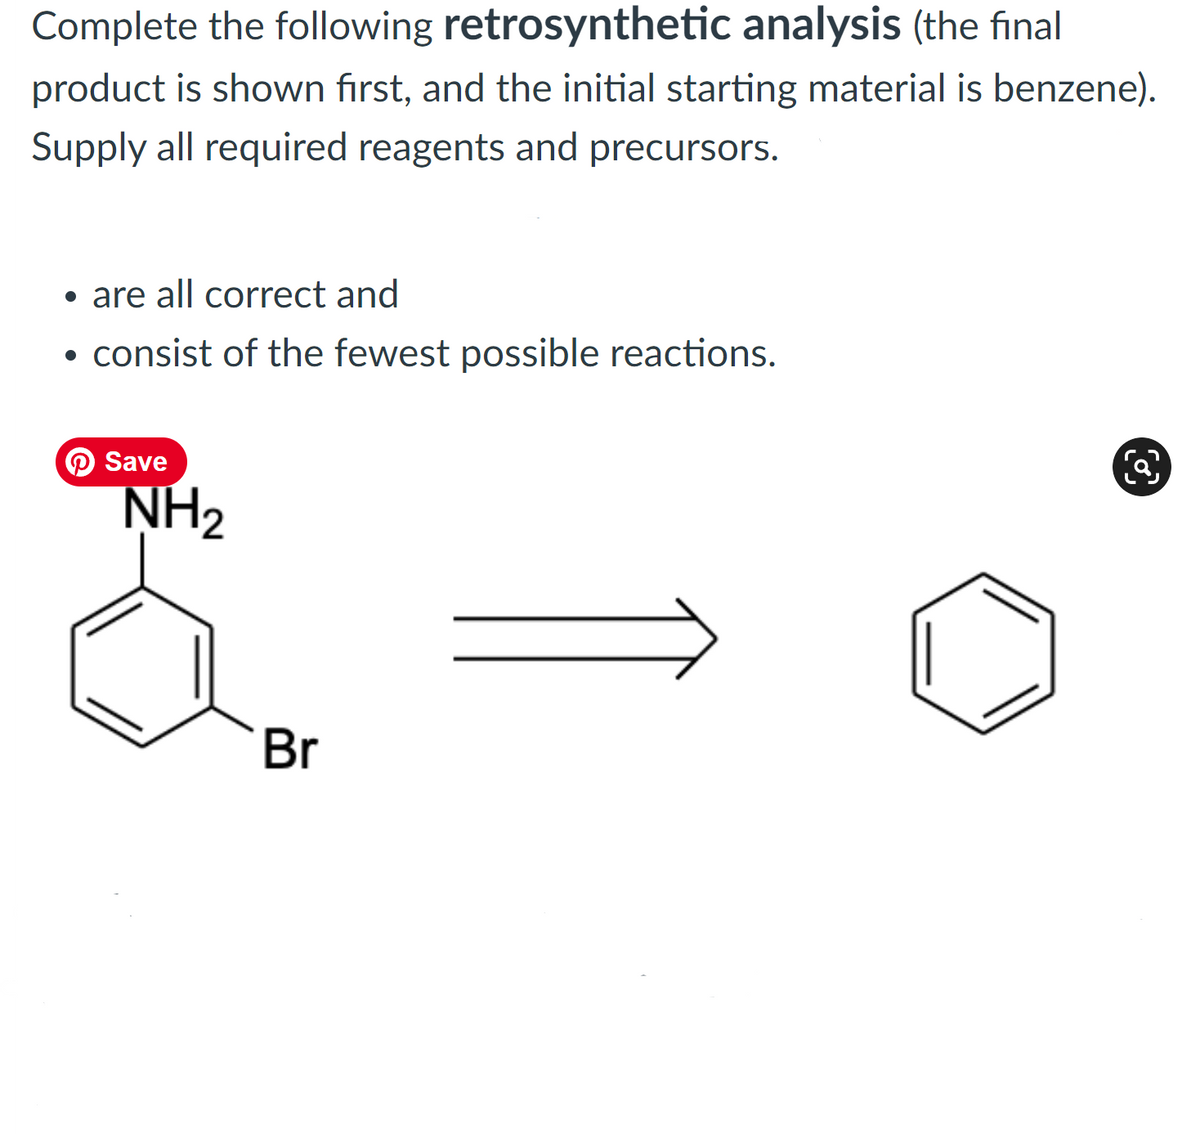 Complete the following retrosynthetic analysis (the final
product is shown first, and the initial starting material is benzene).
Supply all required reagents and precursors.
• are all correct and
• consist of the fewest possible reactions.
O Save
NH2
Br
